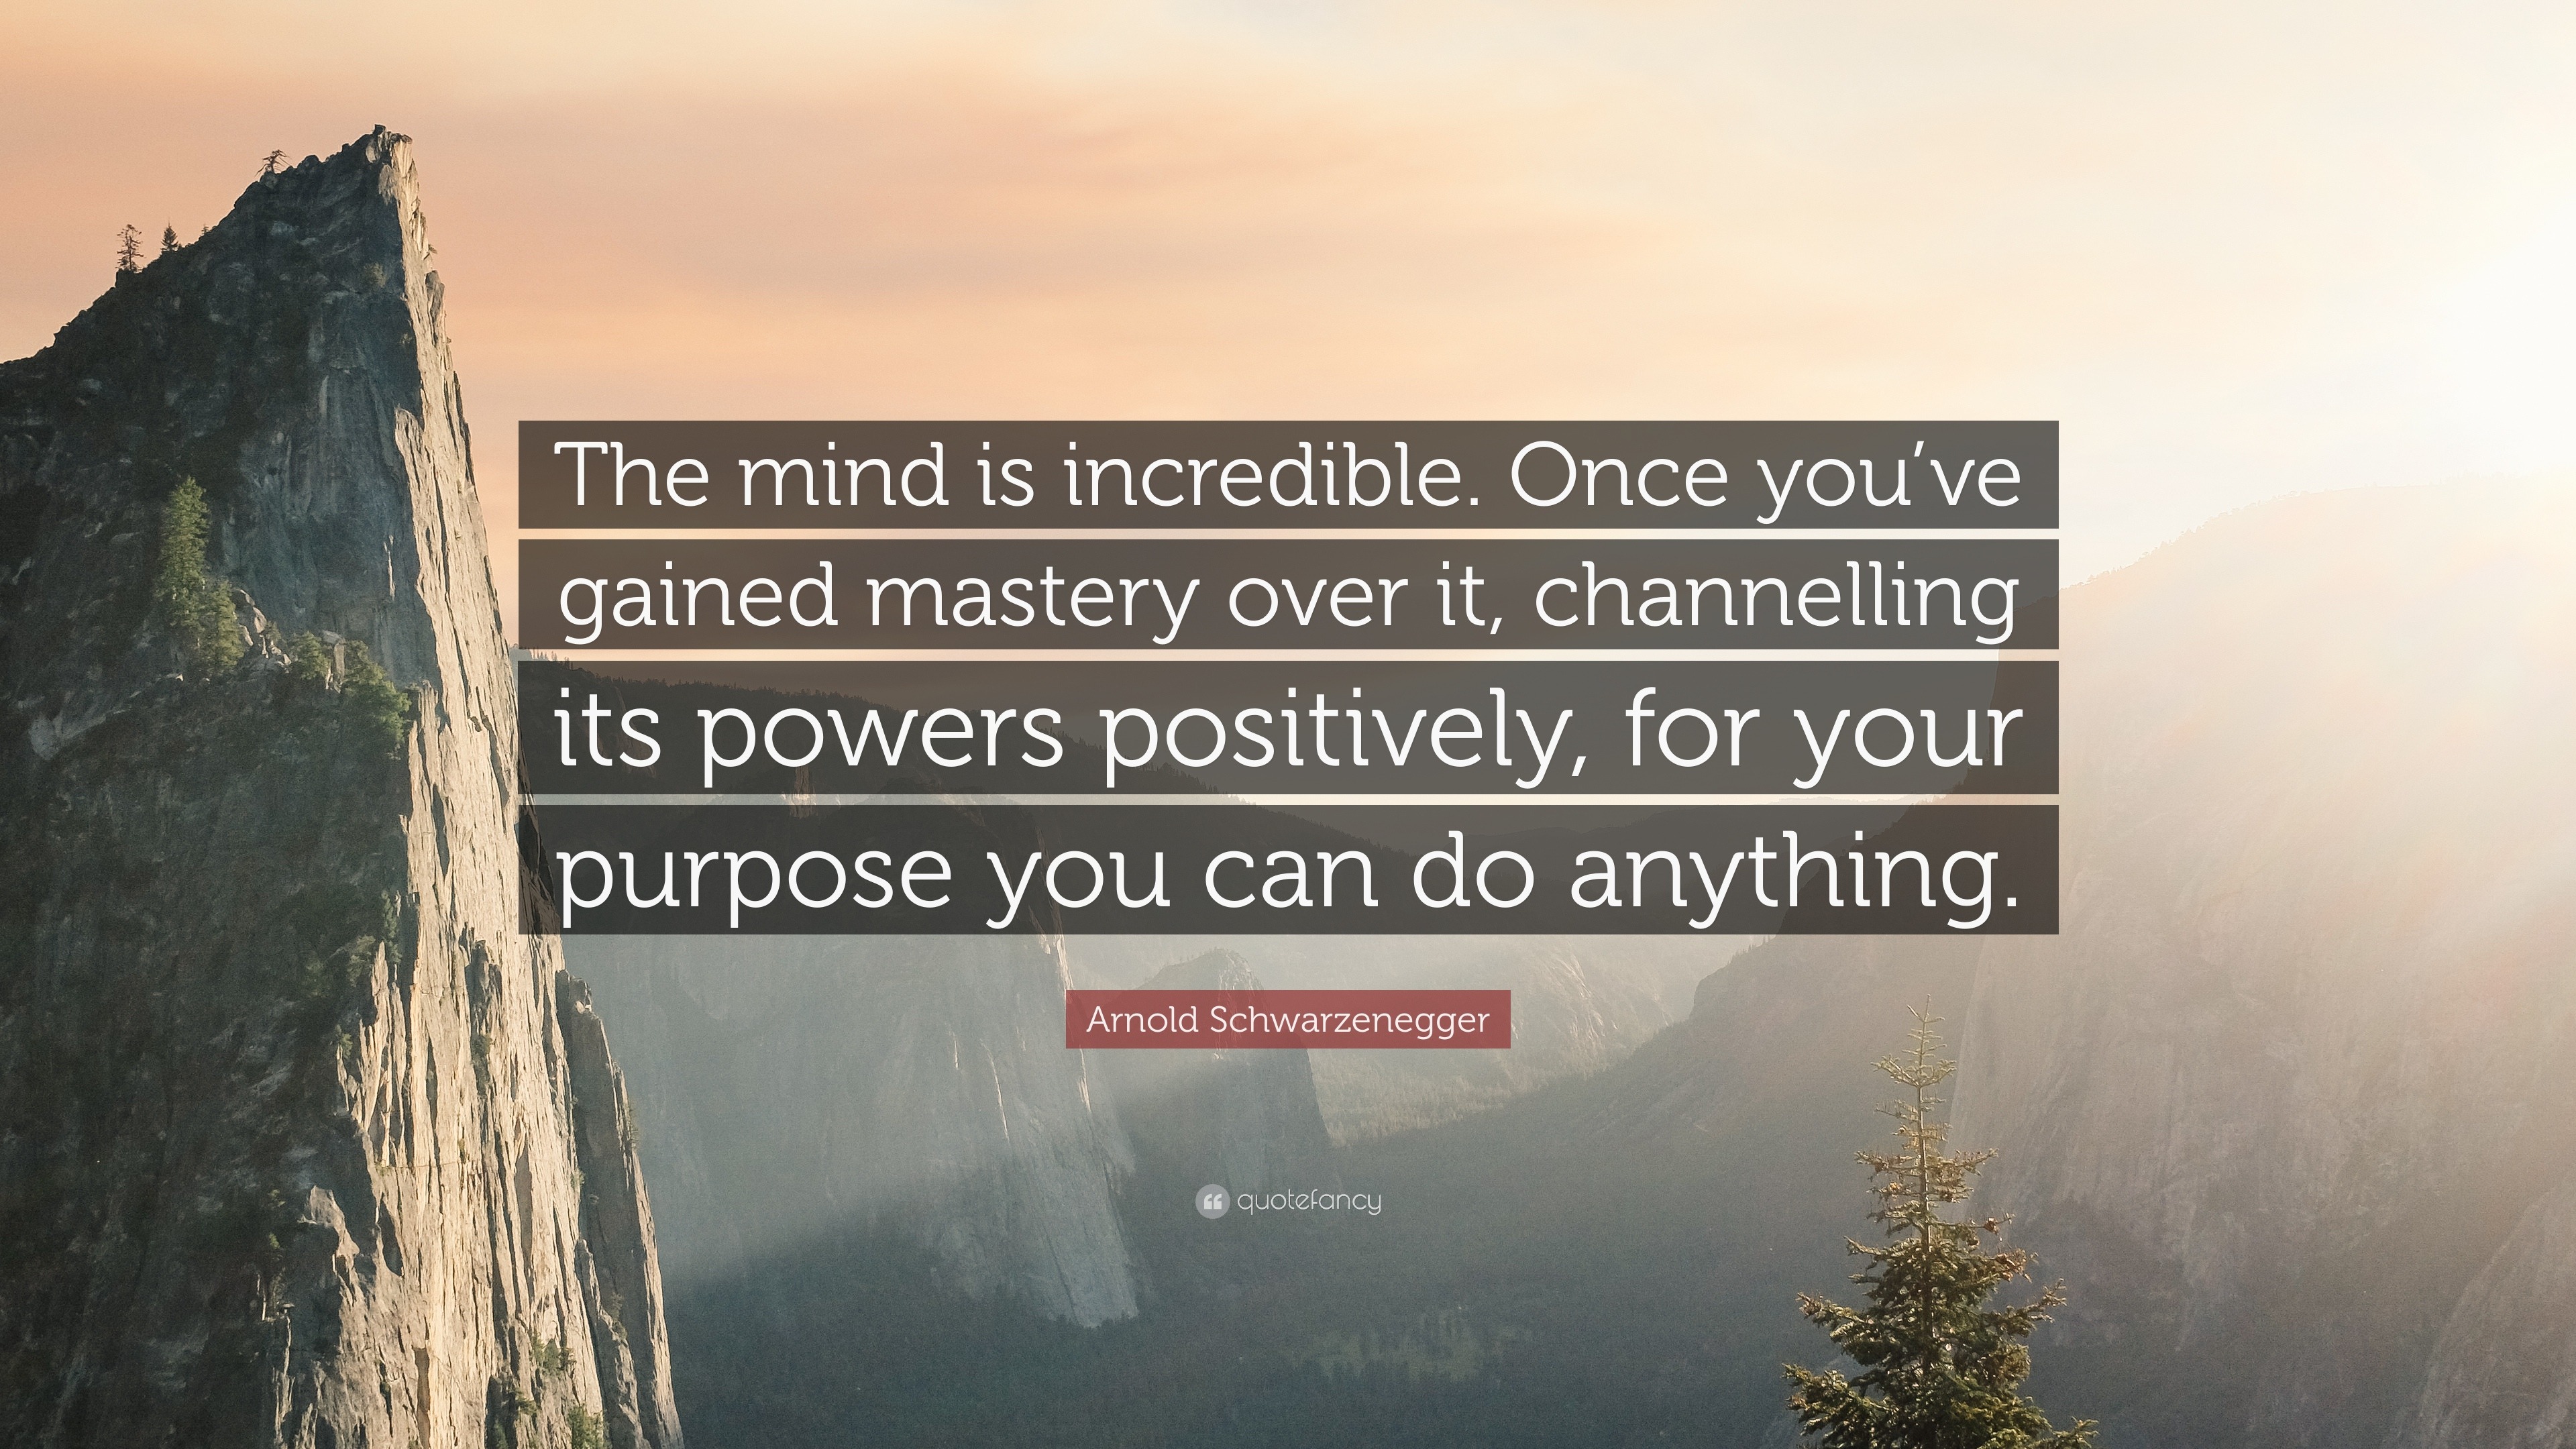 Arnold Schwarzenegger Quote: “The mind is incredible. Once you’ve ...